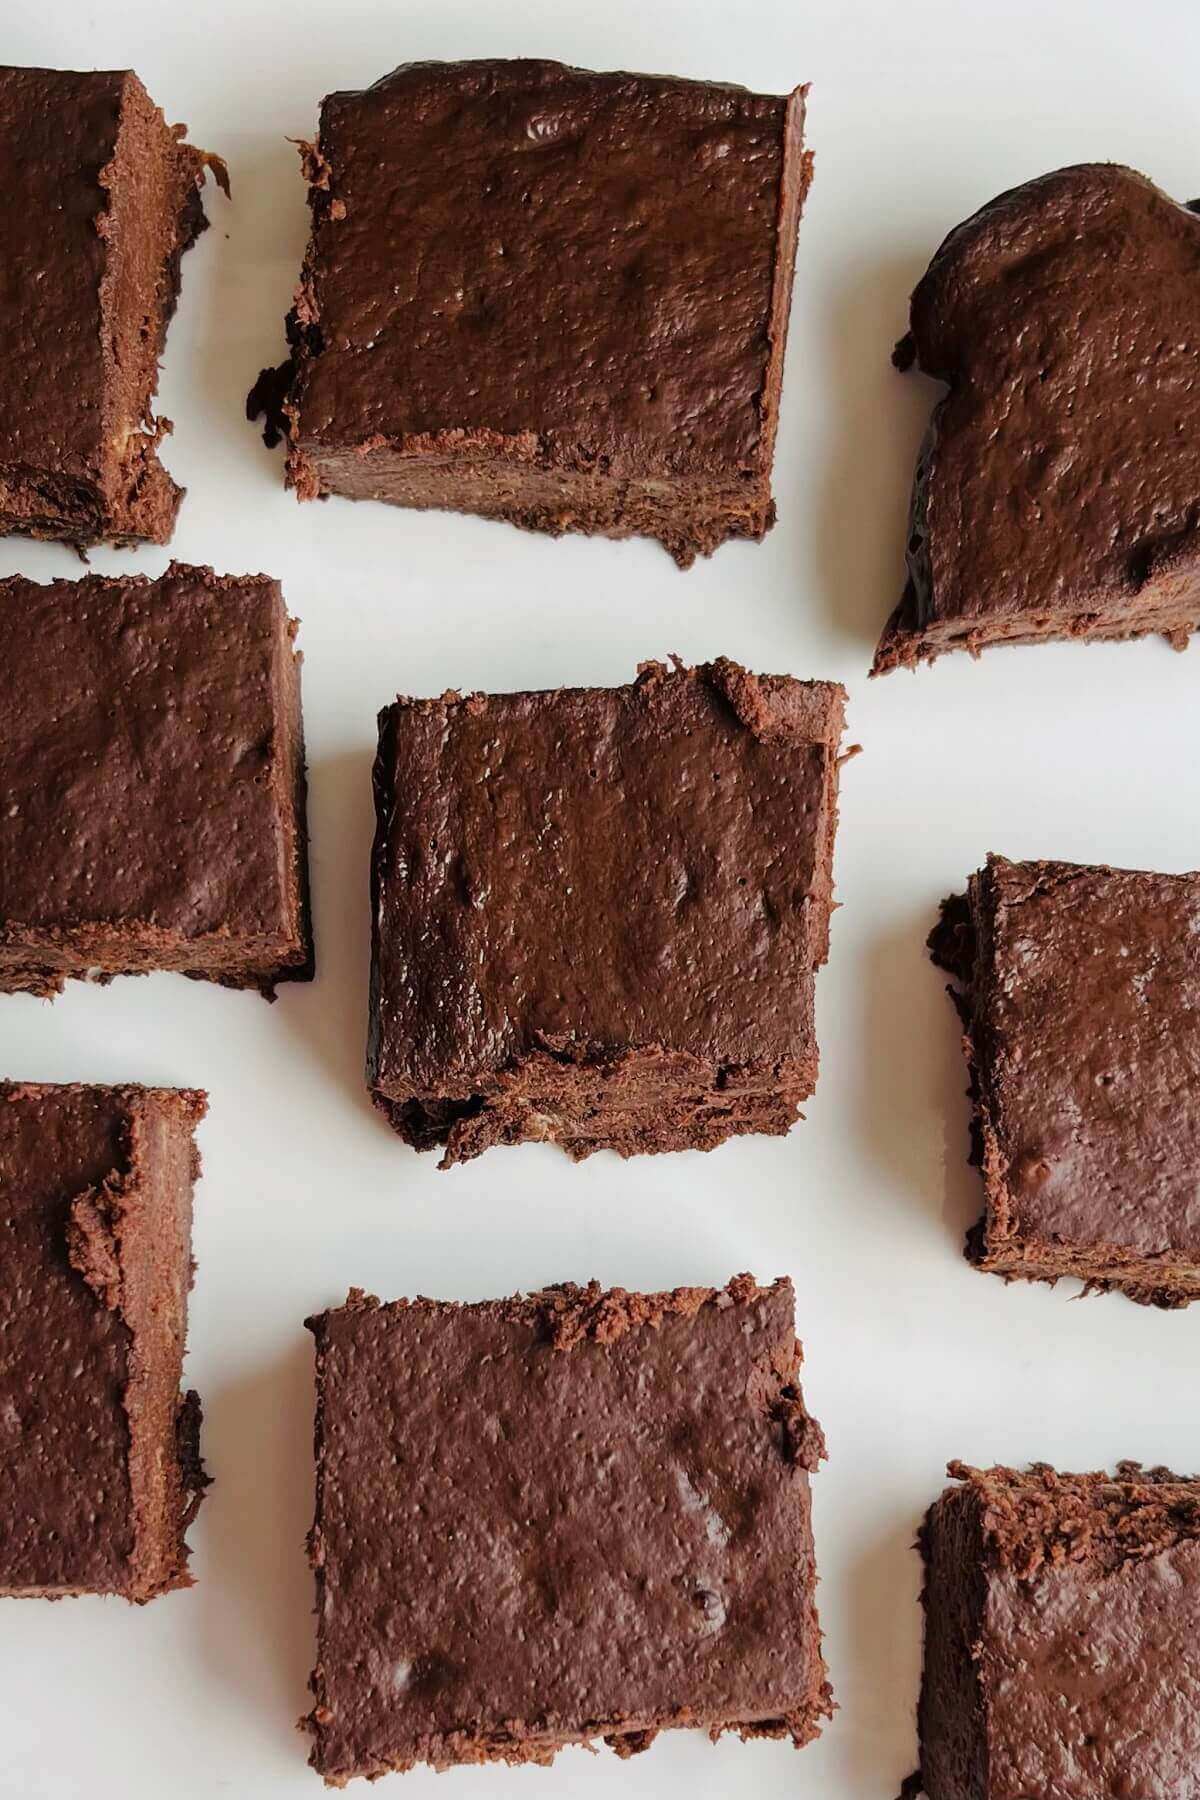 Brownies cut in squares on a white plate.